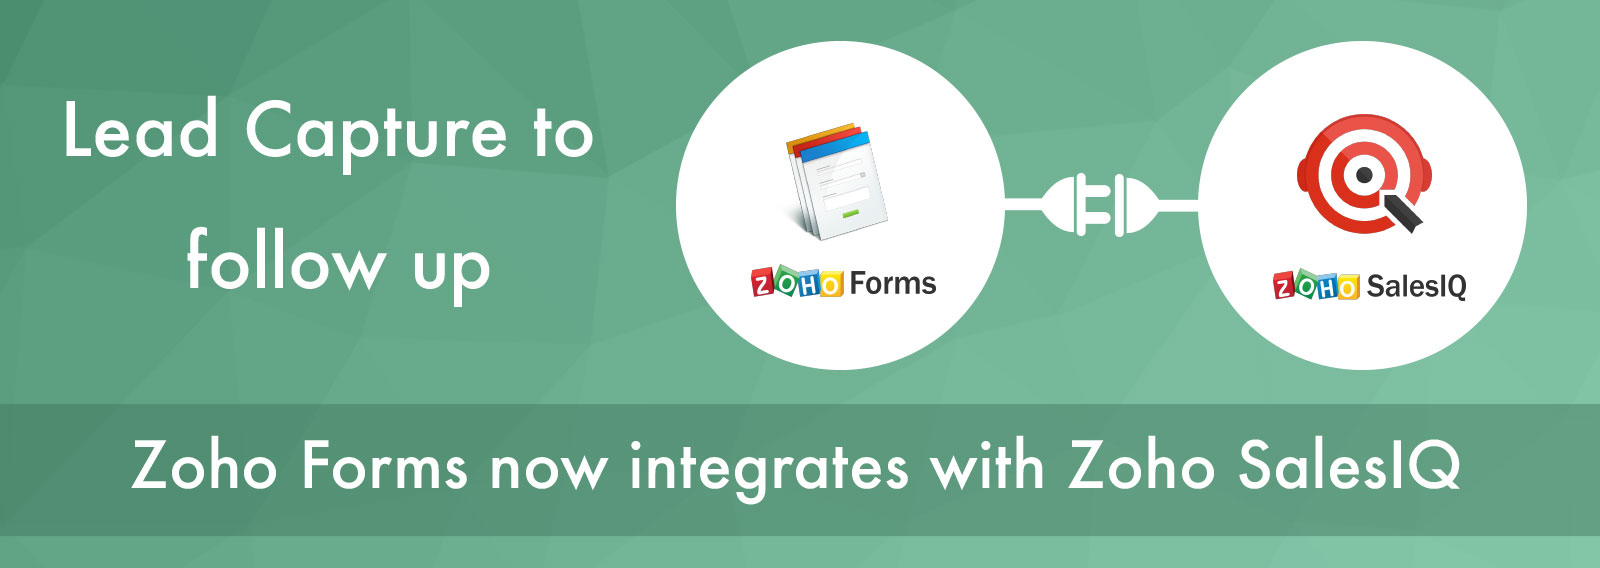 Your data collection stays on point with the new Zoho Forms integration with Zoho SalesIQ